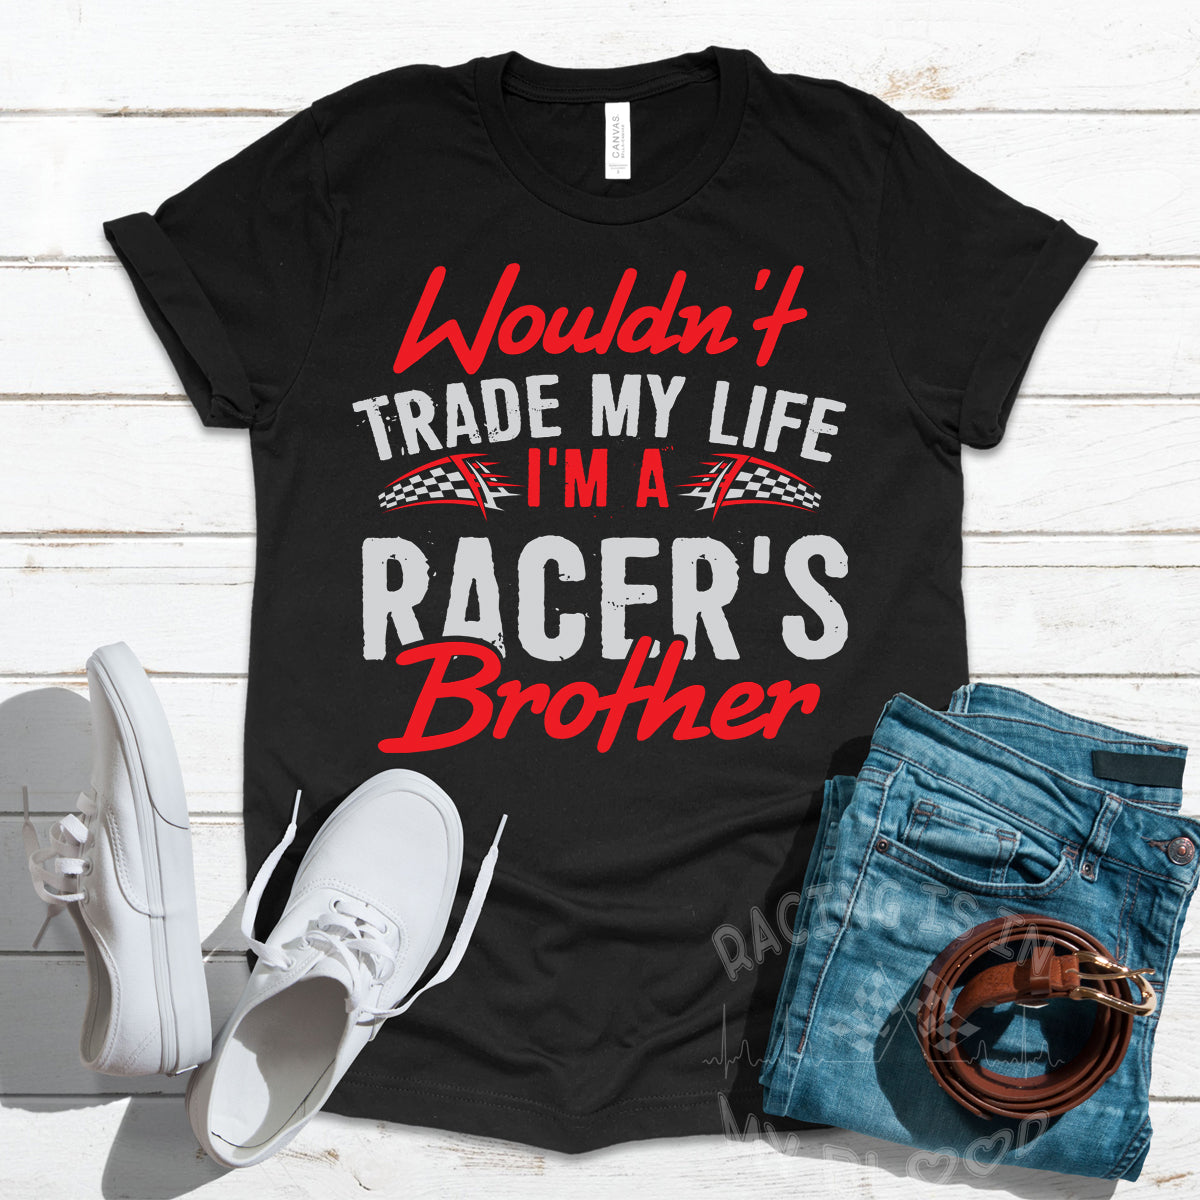 Wouldn't Trade My Life I'm A Racer's Brother T-Shirts!